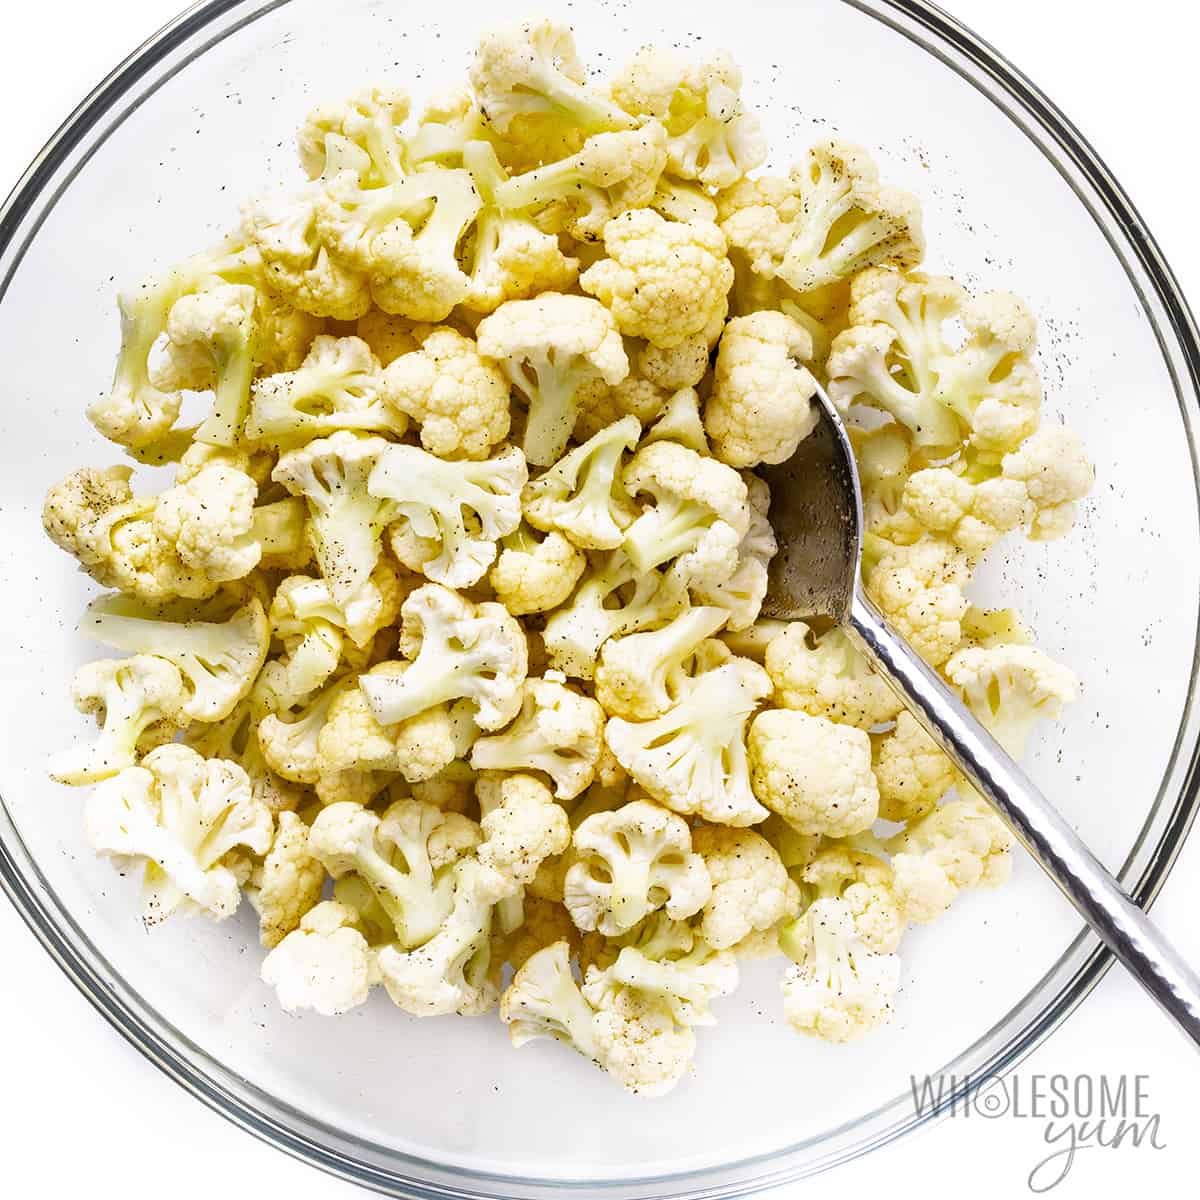 Cauliflower florets with oil and seasonings in a bowl.